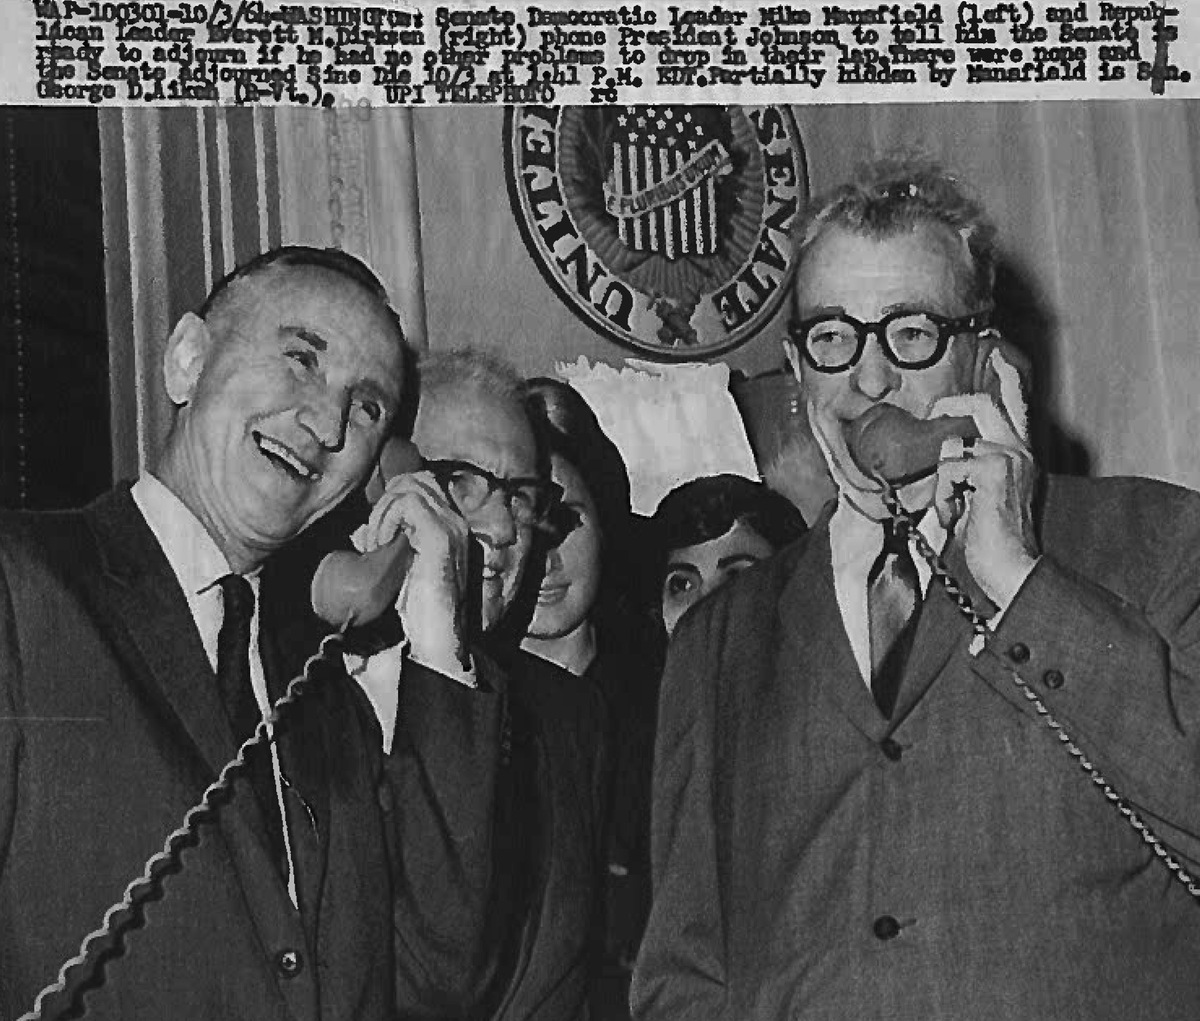 Senators Mike Mansfield and Everett Dirksen smiling and each speaking into a telephone.